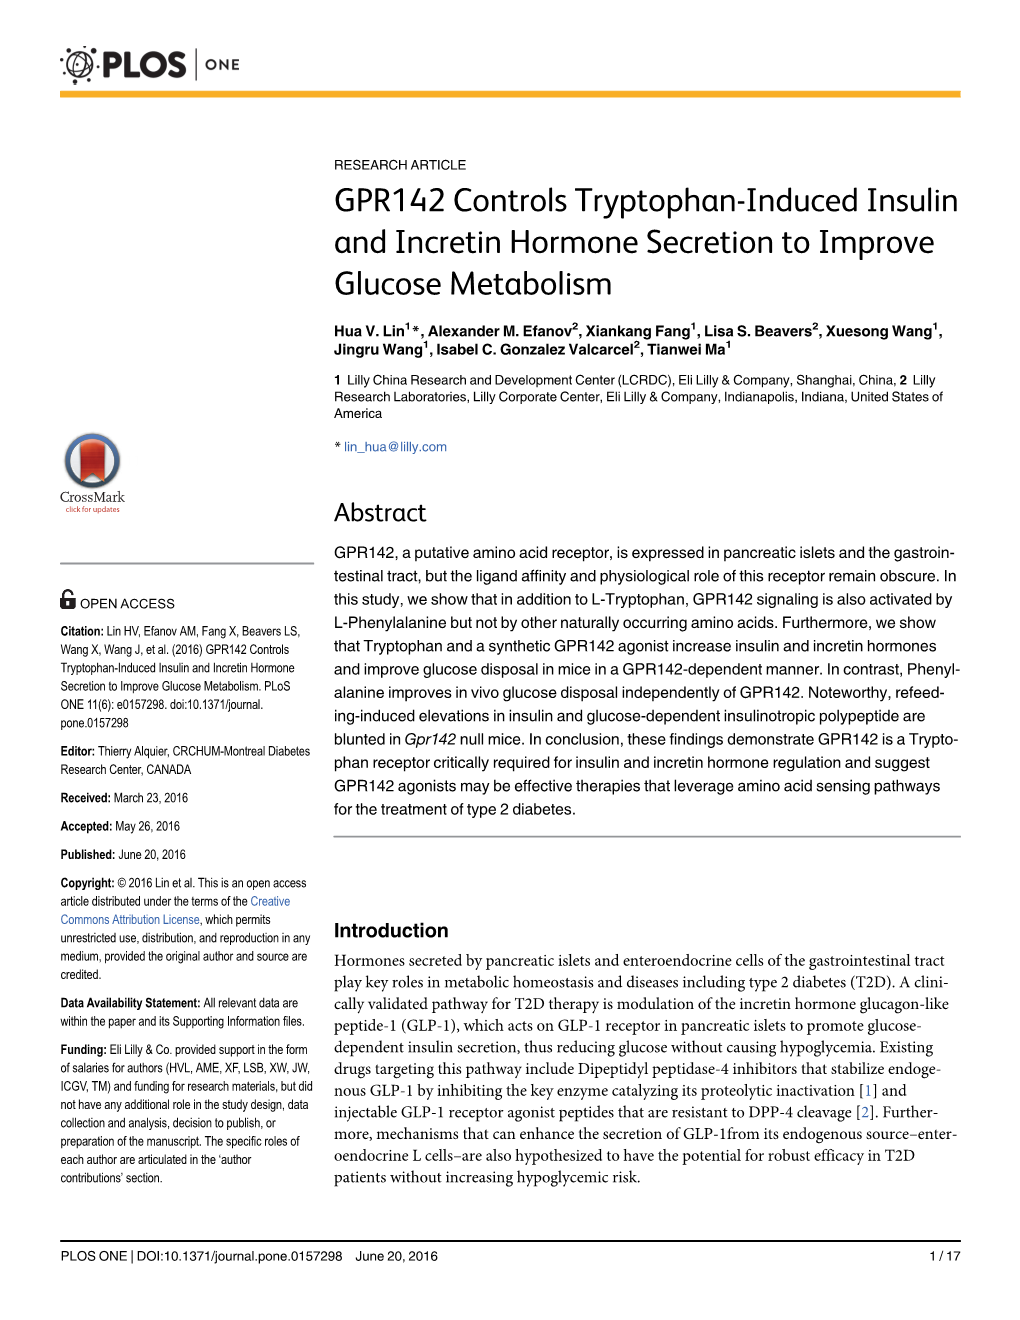 GPR142 Controls Tryptophan-Induced Insulin and Incretin Hormone Secretion to Improve Glucose Metabolism